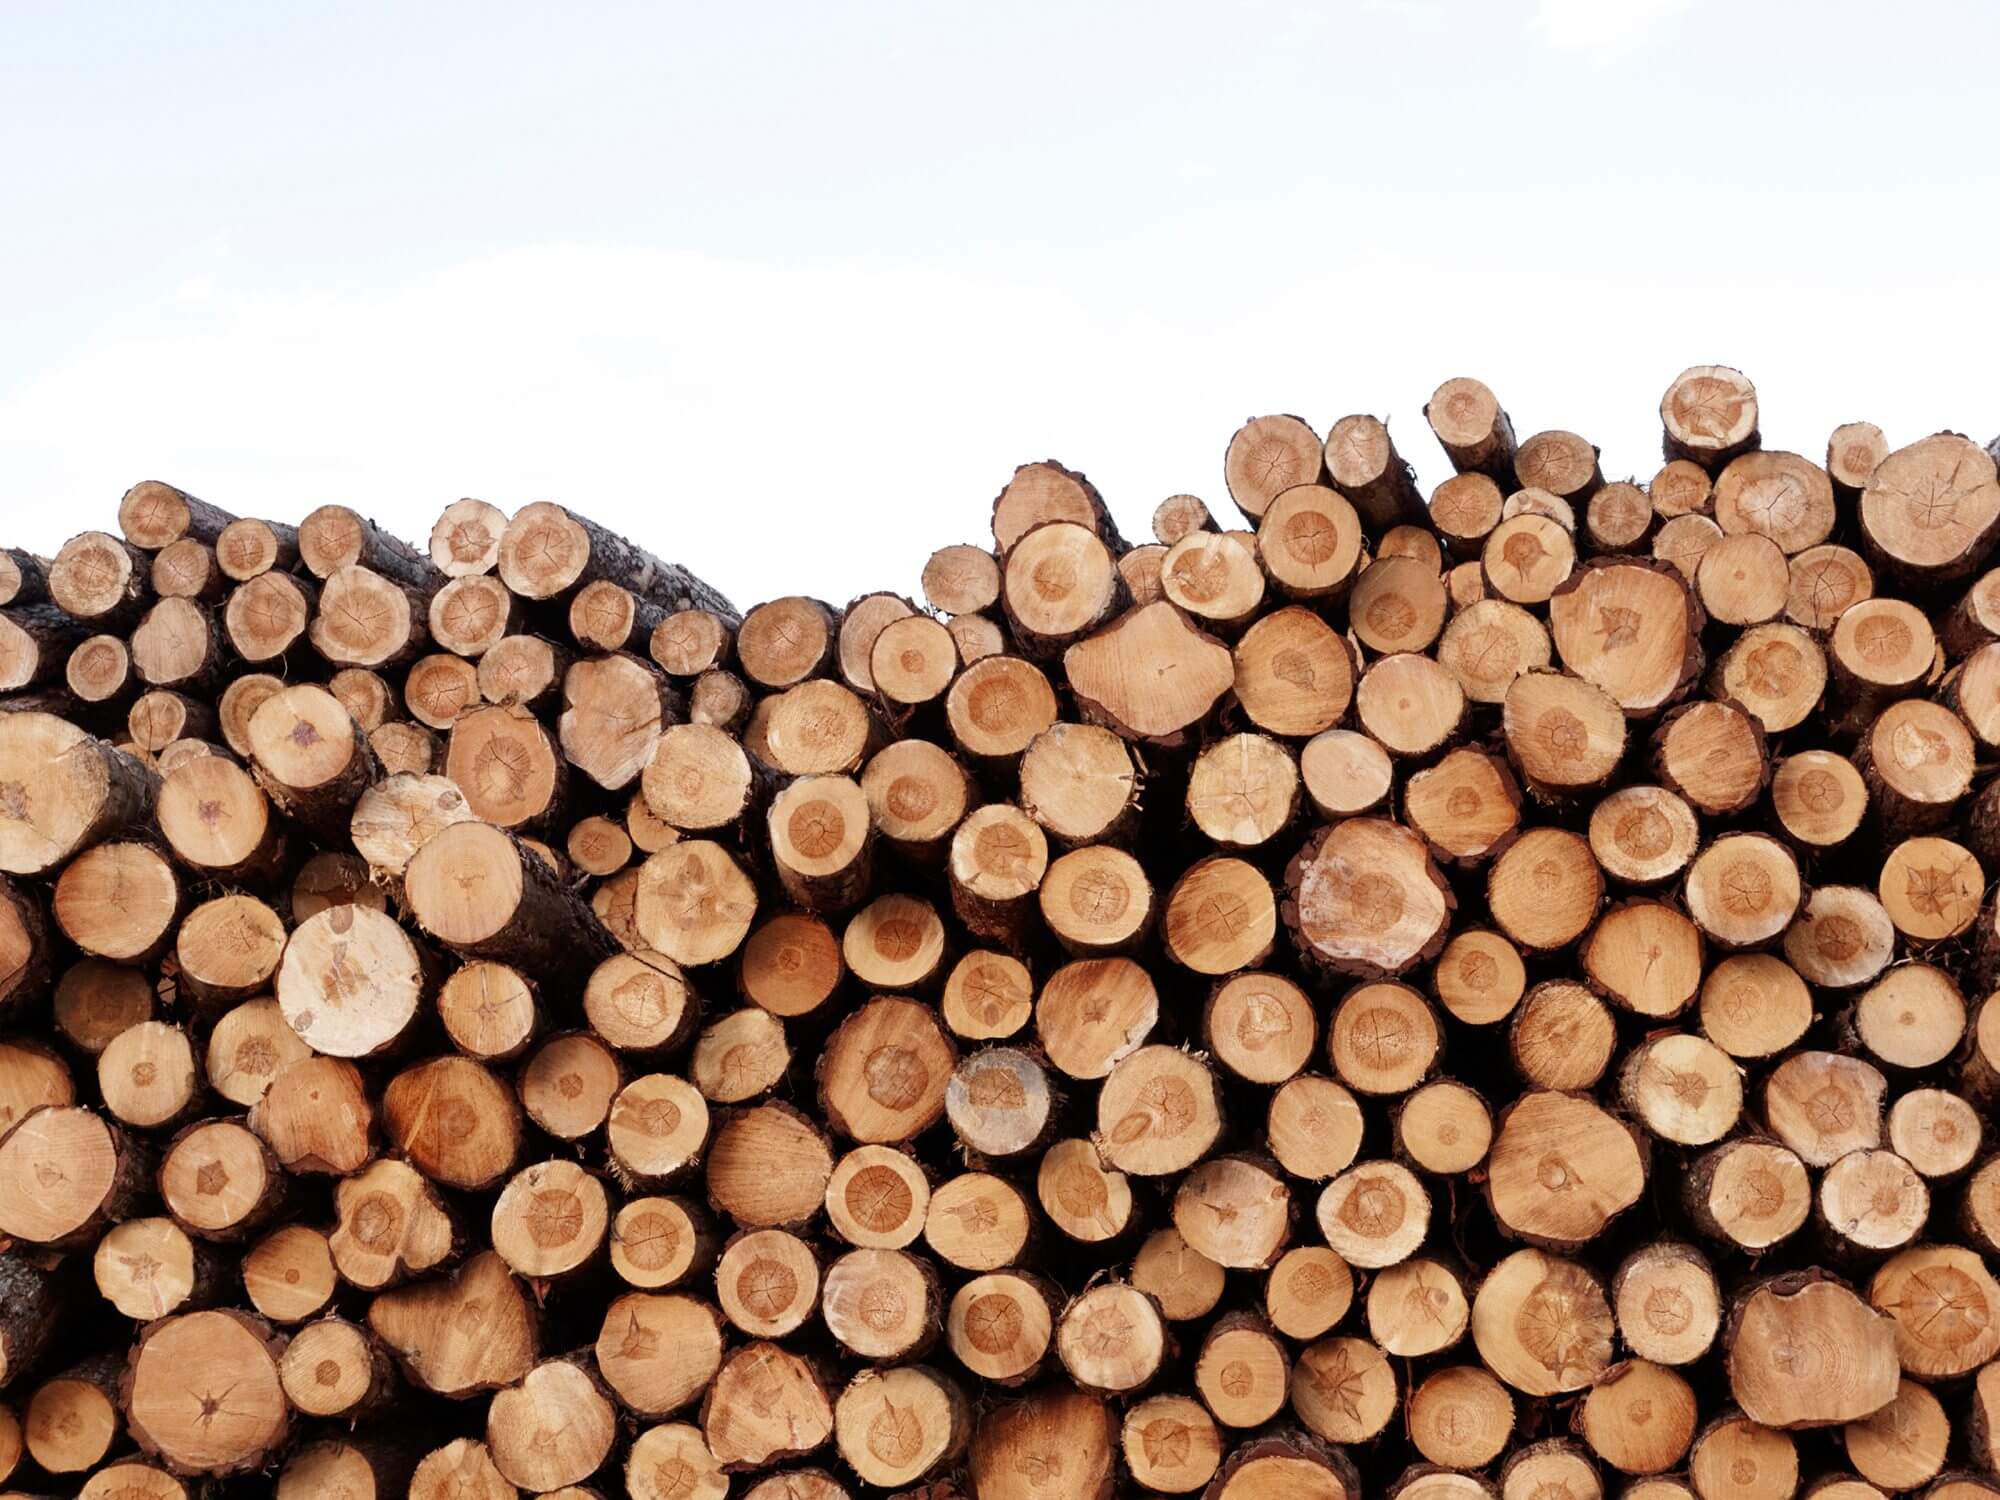 Sourcing timber responsibly